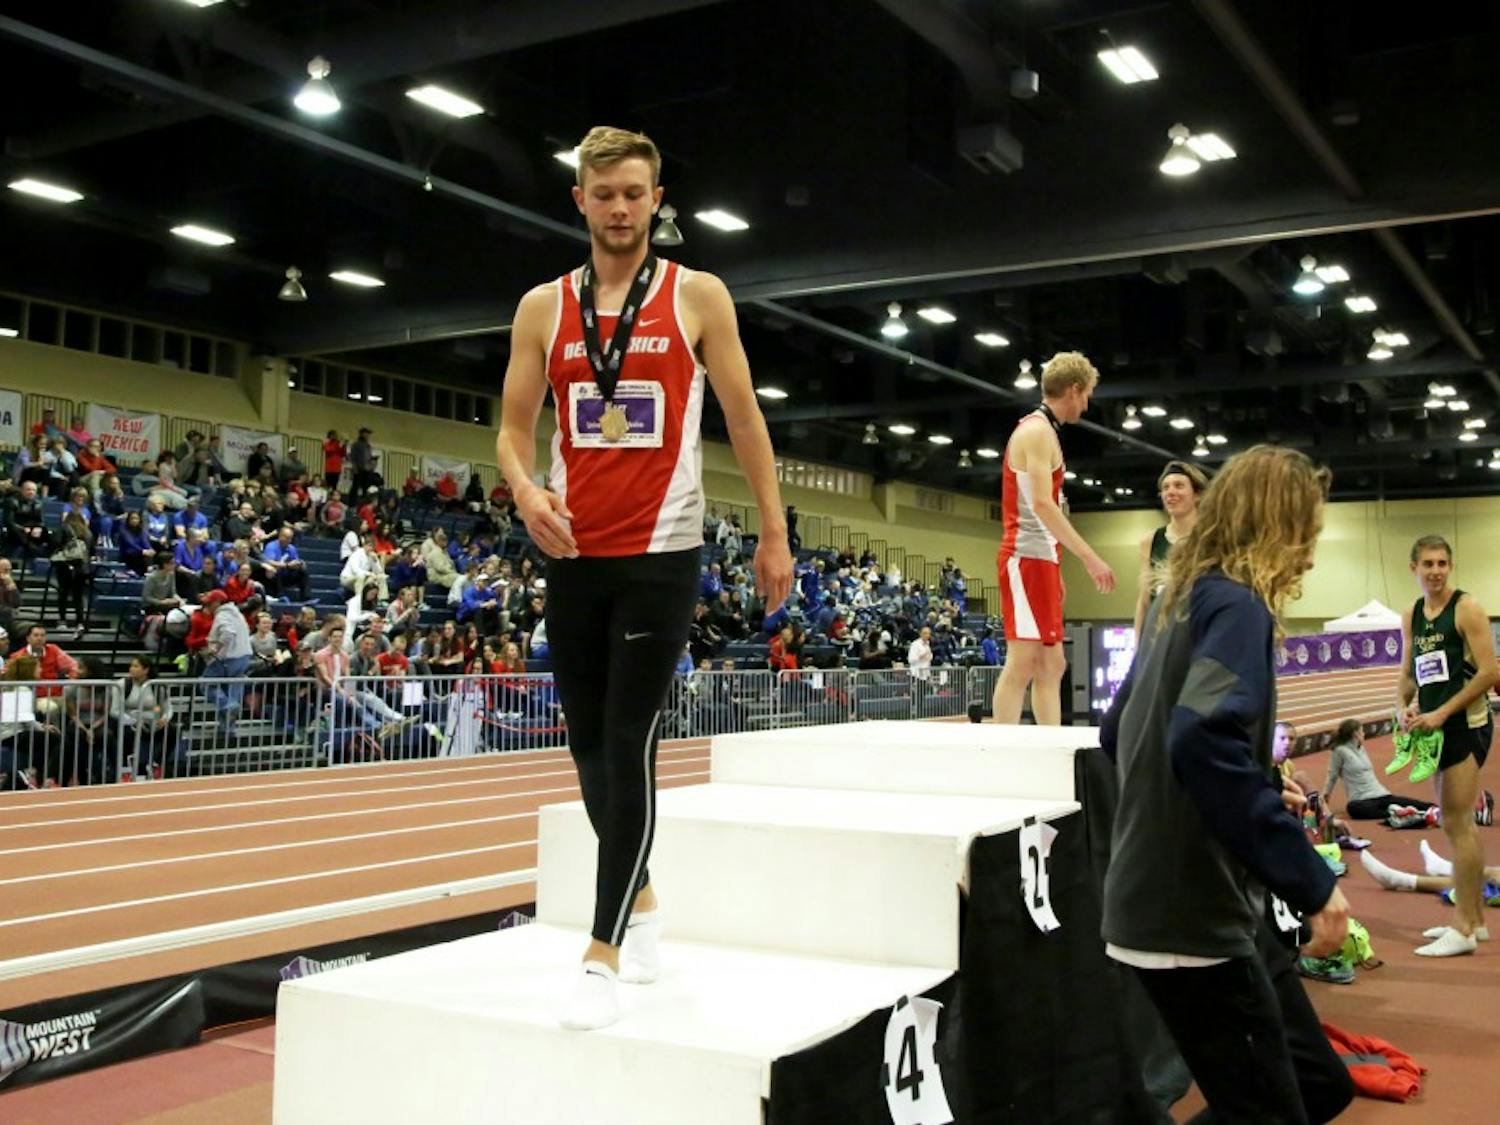 Sophomore distance runner Josh Kerr walks off the podium after coming in first for the mens mile at the Mountain West Track and Field Championship. Kerr was named national athlete of the week due to his most recent 1500 meter time being the nest in the world.